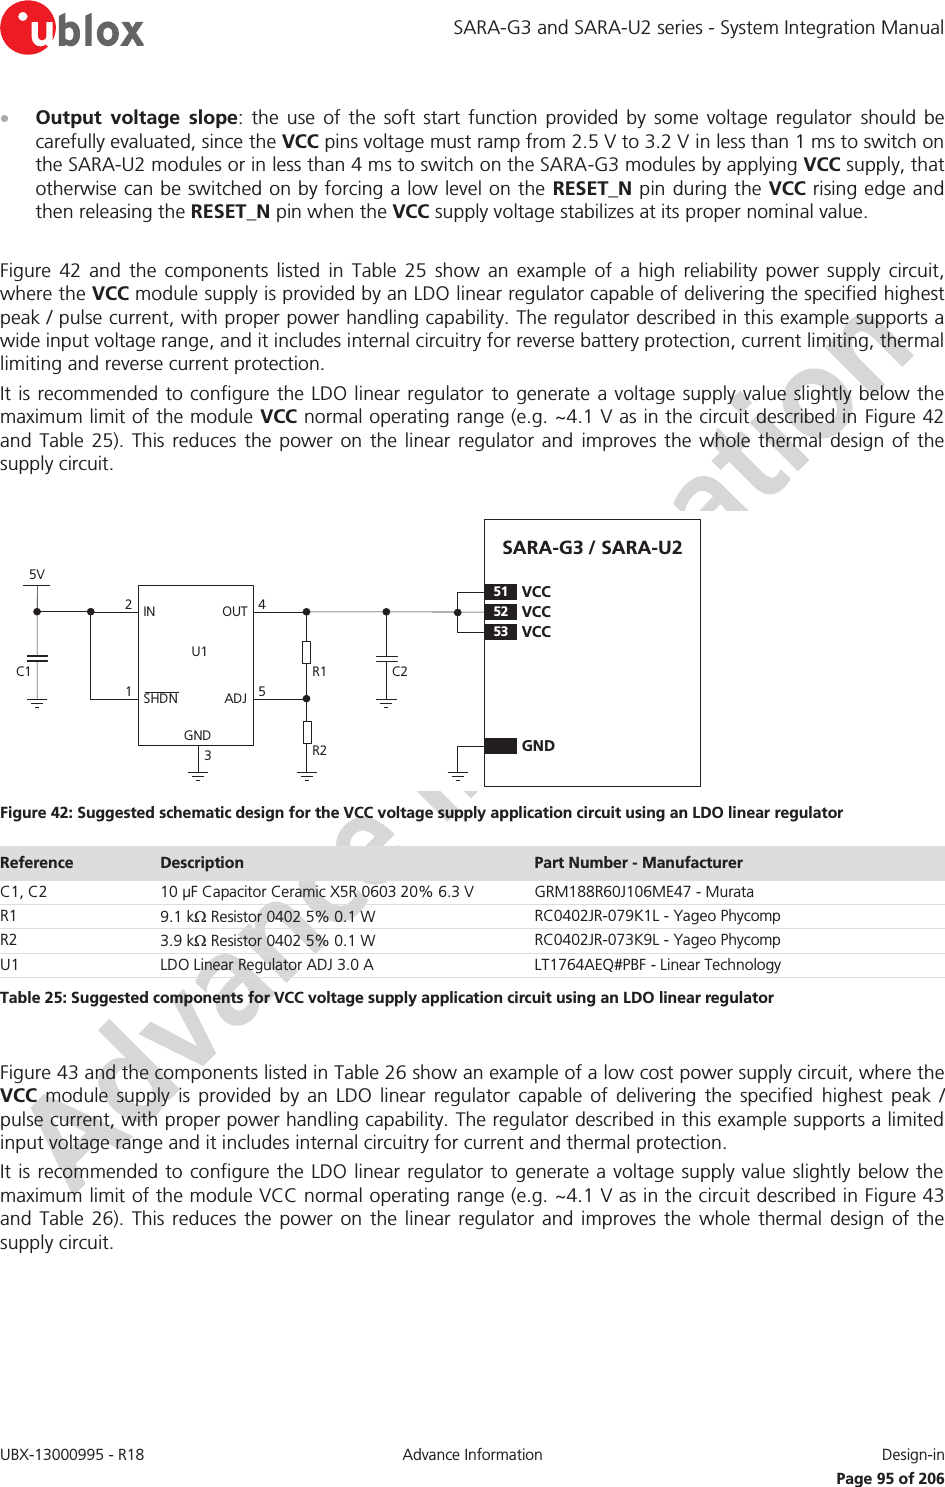 SARA-G3 and SARA-U2 series - System Integration Manual UBX-13000995 - R18  Advance Information  Design-in   Page 95 of 206 x Output voltage slope: the use of the soft start function provided by some voltage regulator should be carefully evaluated, since the VCC pins voltage must ramp from 2.5 V to 3.2 V in less than 1 ms to switch on the SARA-U2 modules or in less than 4 ms to switch on the SARA-G3 modules by applying VCC supply, that otherwise can be switched on by forcing a low level on the RESET_N pin during the VCC rising edge and then releasing the RESET_N pin when the VCC supply voltage stabilizes at its proper nominal value.  Figure 42 and the components listed in Table 25 show an example of a high reliability power supply circuit, where the VCC module supply is provided by an LDO linear regulator capable of delivering the specified highest peak / pulse current, with proper power handling capability. The regulator described in this example supports a wide input voltage range, and it includes internal circuitry for reverse battery protection, current limiting, thermal limiting and reverse current protection. It is recommended to configure the LDO linear regulator to generate a voltage supply value slightly below the maximum limit of the module VCC normal operating range (e.g. ~4.1 V as in the circuit described in Figure 42 and Table 25). This reduces the power on the linear regulator and improves the whole thermal design of the supply circuit.  5VC1IN OUTADJGND12453C2R1R2U1SHDNSARA-G3 / SARA-U252VCC53VCC51VCCGND Figure 42: Suggested schematic design for the VCC voltage supply application circuit using an LDO linear regulator Reference  Description  Part Number - Manufacturer C1, C2 10 μF Capacitor Ceramic X5R 0603 20% 6.3 V GRM188R60J106ME47 - Murata R1 9.1 k: Resistor 0402 5% 0.1 W RC0402JR-079K1L - Yageo Phycomp R2 3.9 k: Resistor 0402 5% 0.1 W RC0402JR-073K9L - Yageo Phycomp U1 LDO Linear Regulator ADJ 3.0 A LT1764AEQ#PBF - Linear Technology Table 25: Suggested components for VCC voltage supply application circuit using an LDO linear regulator  Figure 43 and the components listed in Table 26 show an example of a low cost power supply circuit, where the VCC module supply is provided by an LDO linear regulator capable of delivering the specified highest peak / pulse current, with proper power handling capability. The regulator described in this example supports a limited input voltage range and it includes internal circuitry for current and thermal protection. It is recommended to configure the LDO linear regulator to generate a voltage supply value slightly below the maximum limit of the module VCC normal operating range (e.g. ~4.1 V as in the circuit described in Figure 43 and Table 26). This reduces the power on the linear regulator and improves the whole thermal design of the supply circuit.  